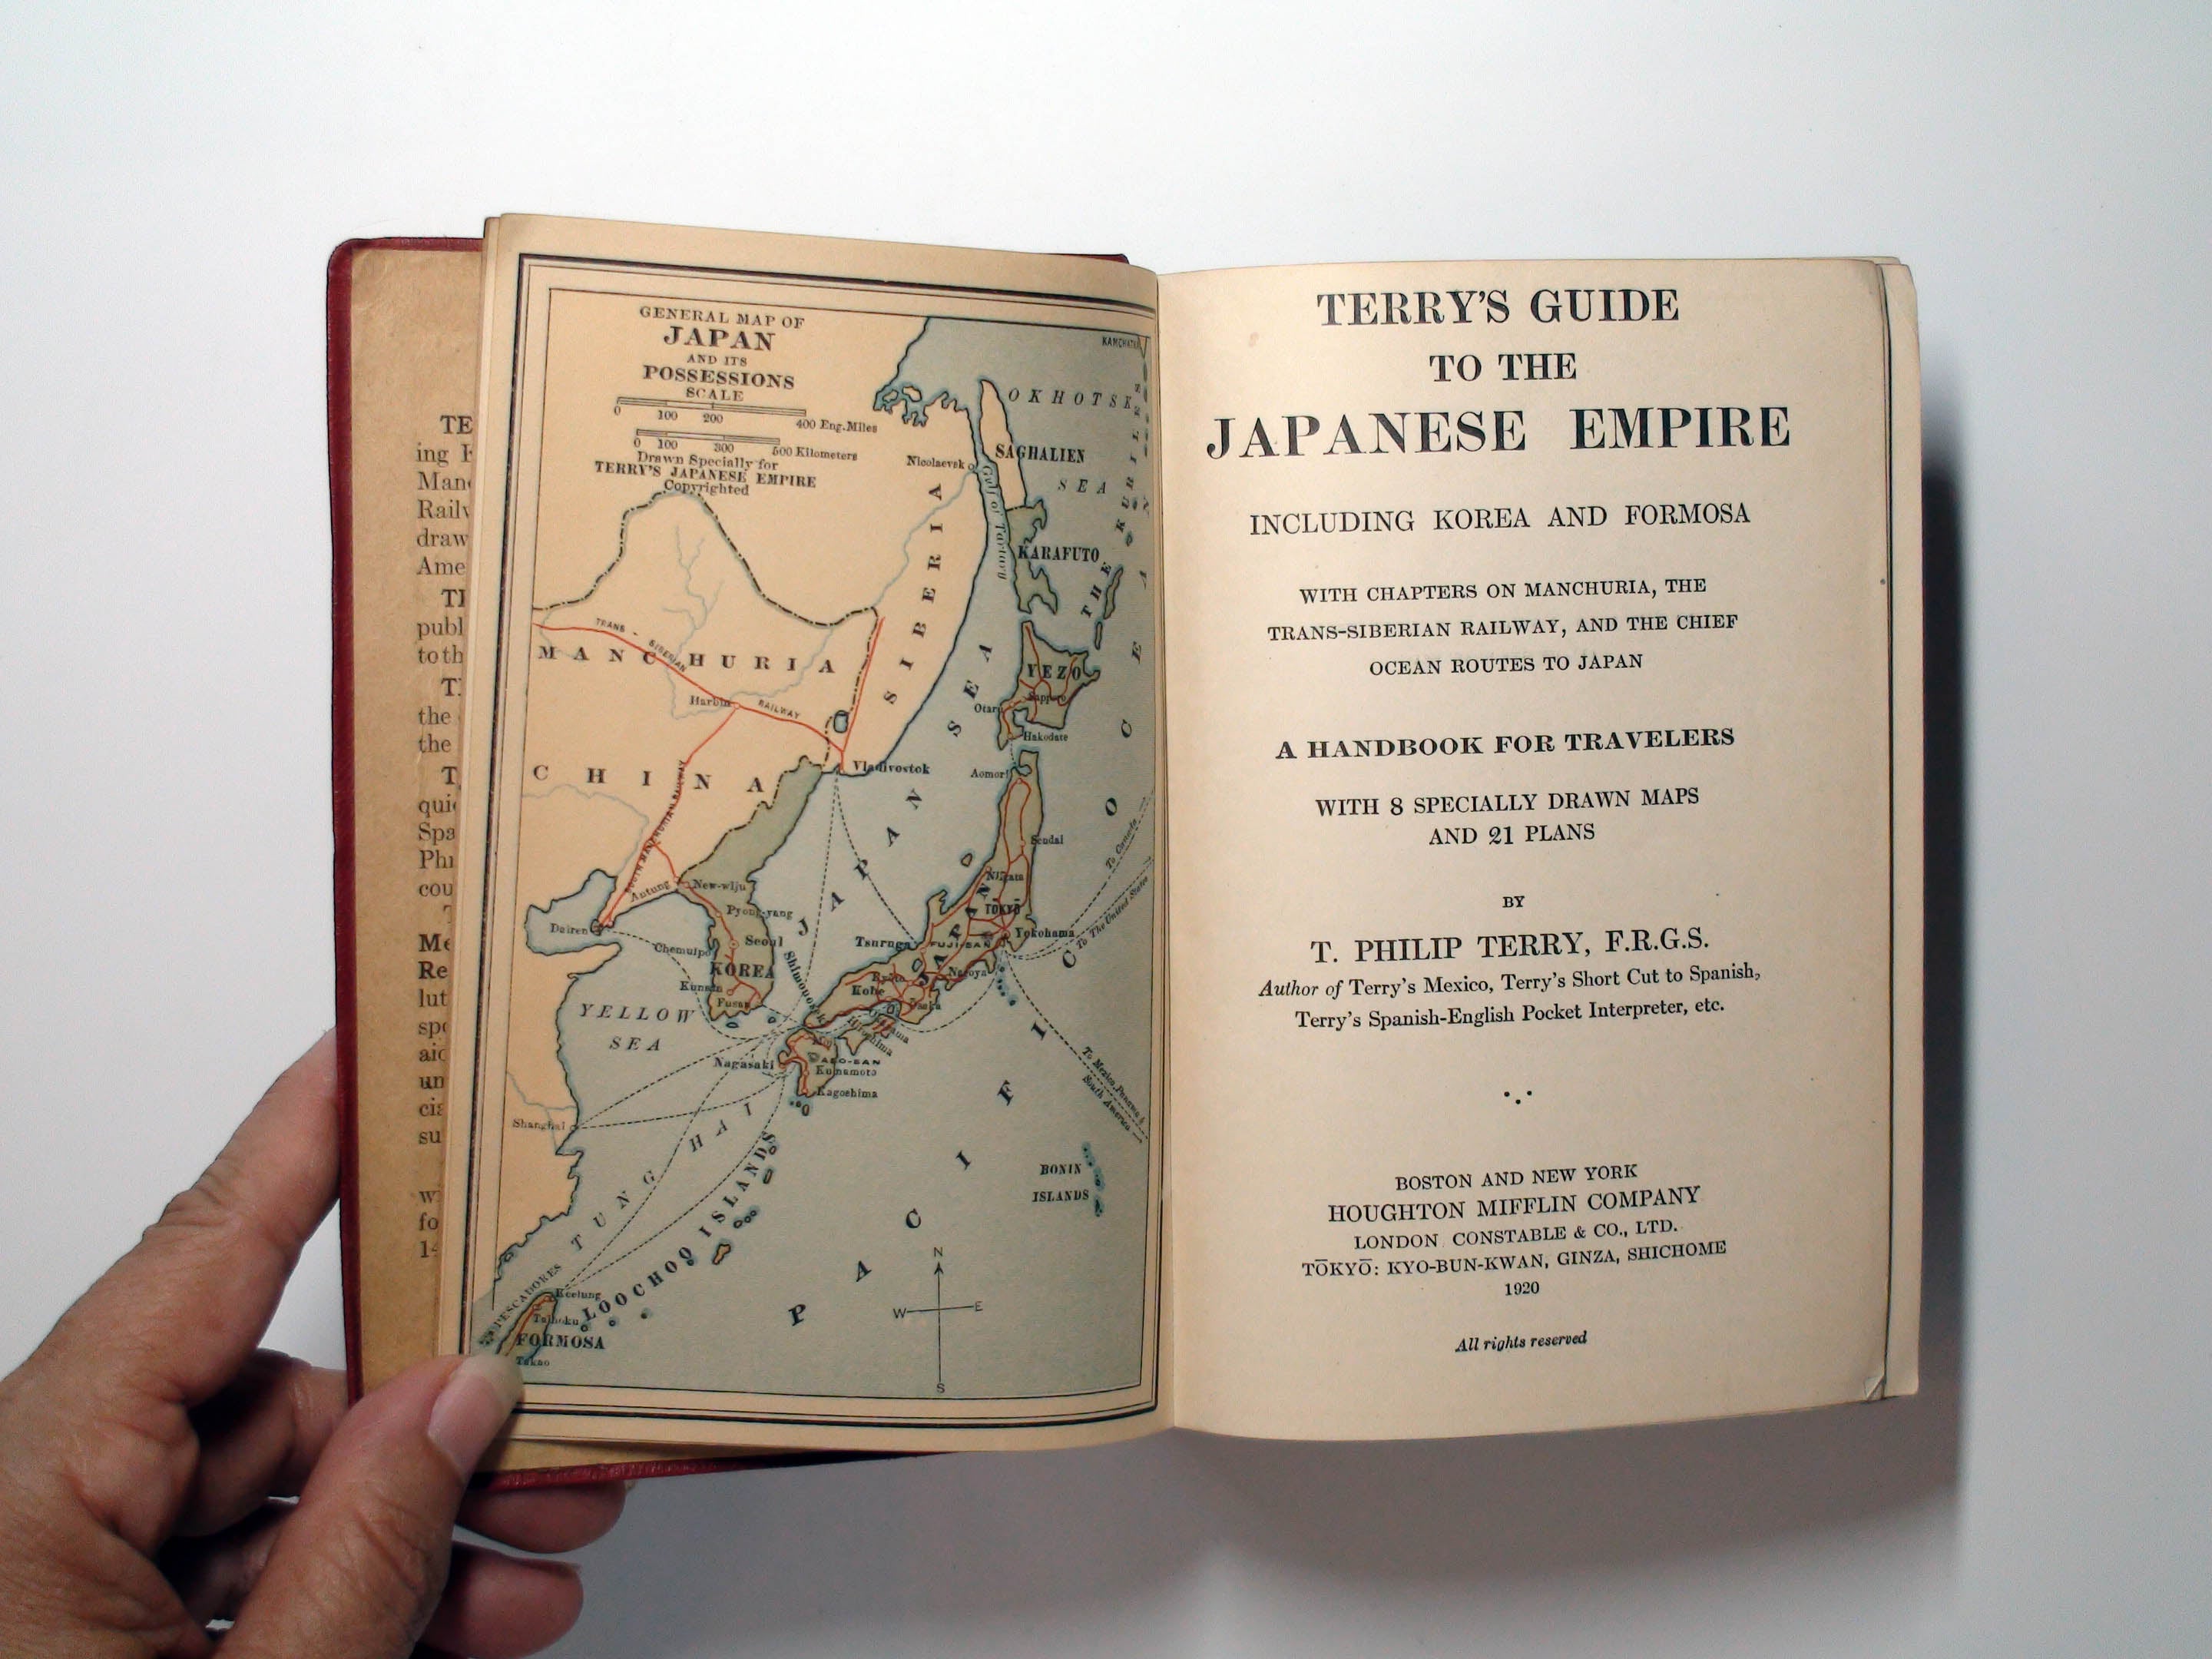 Terry's Guide To The Japanese Empire, Illustrated with Maps, 1920